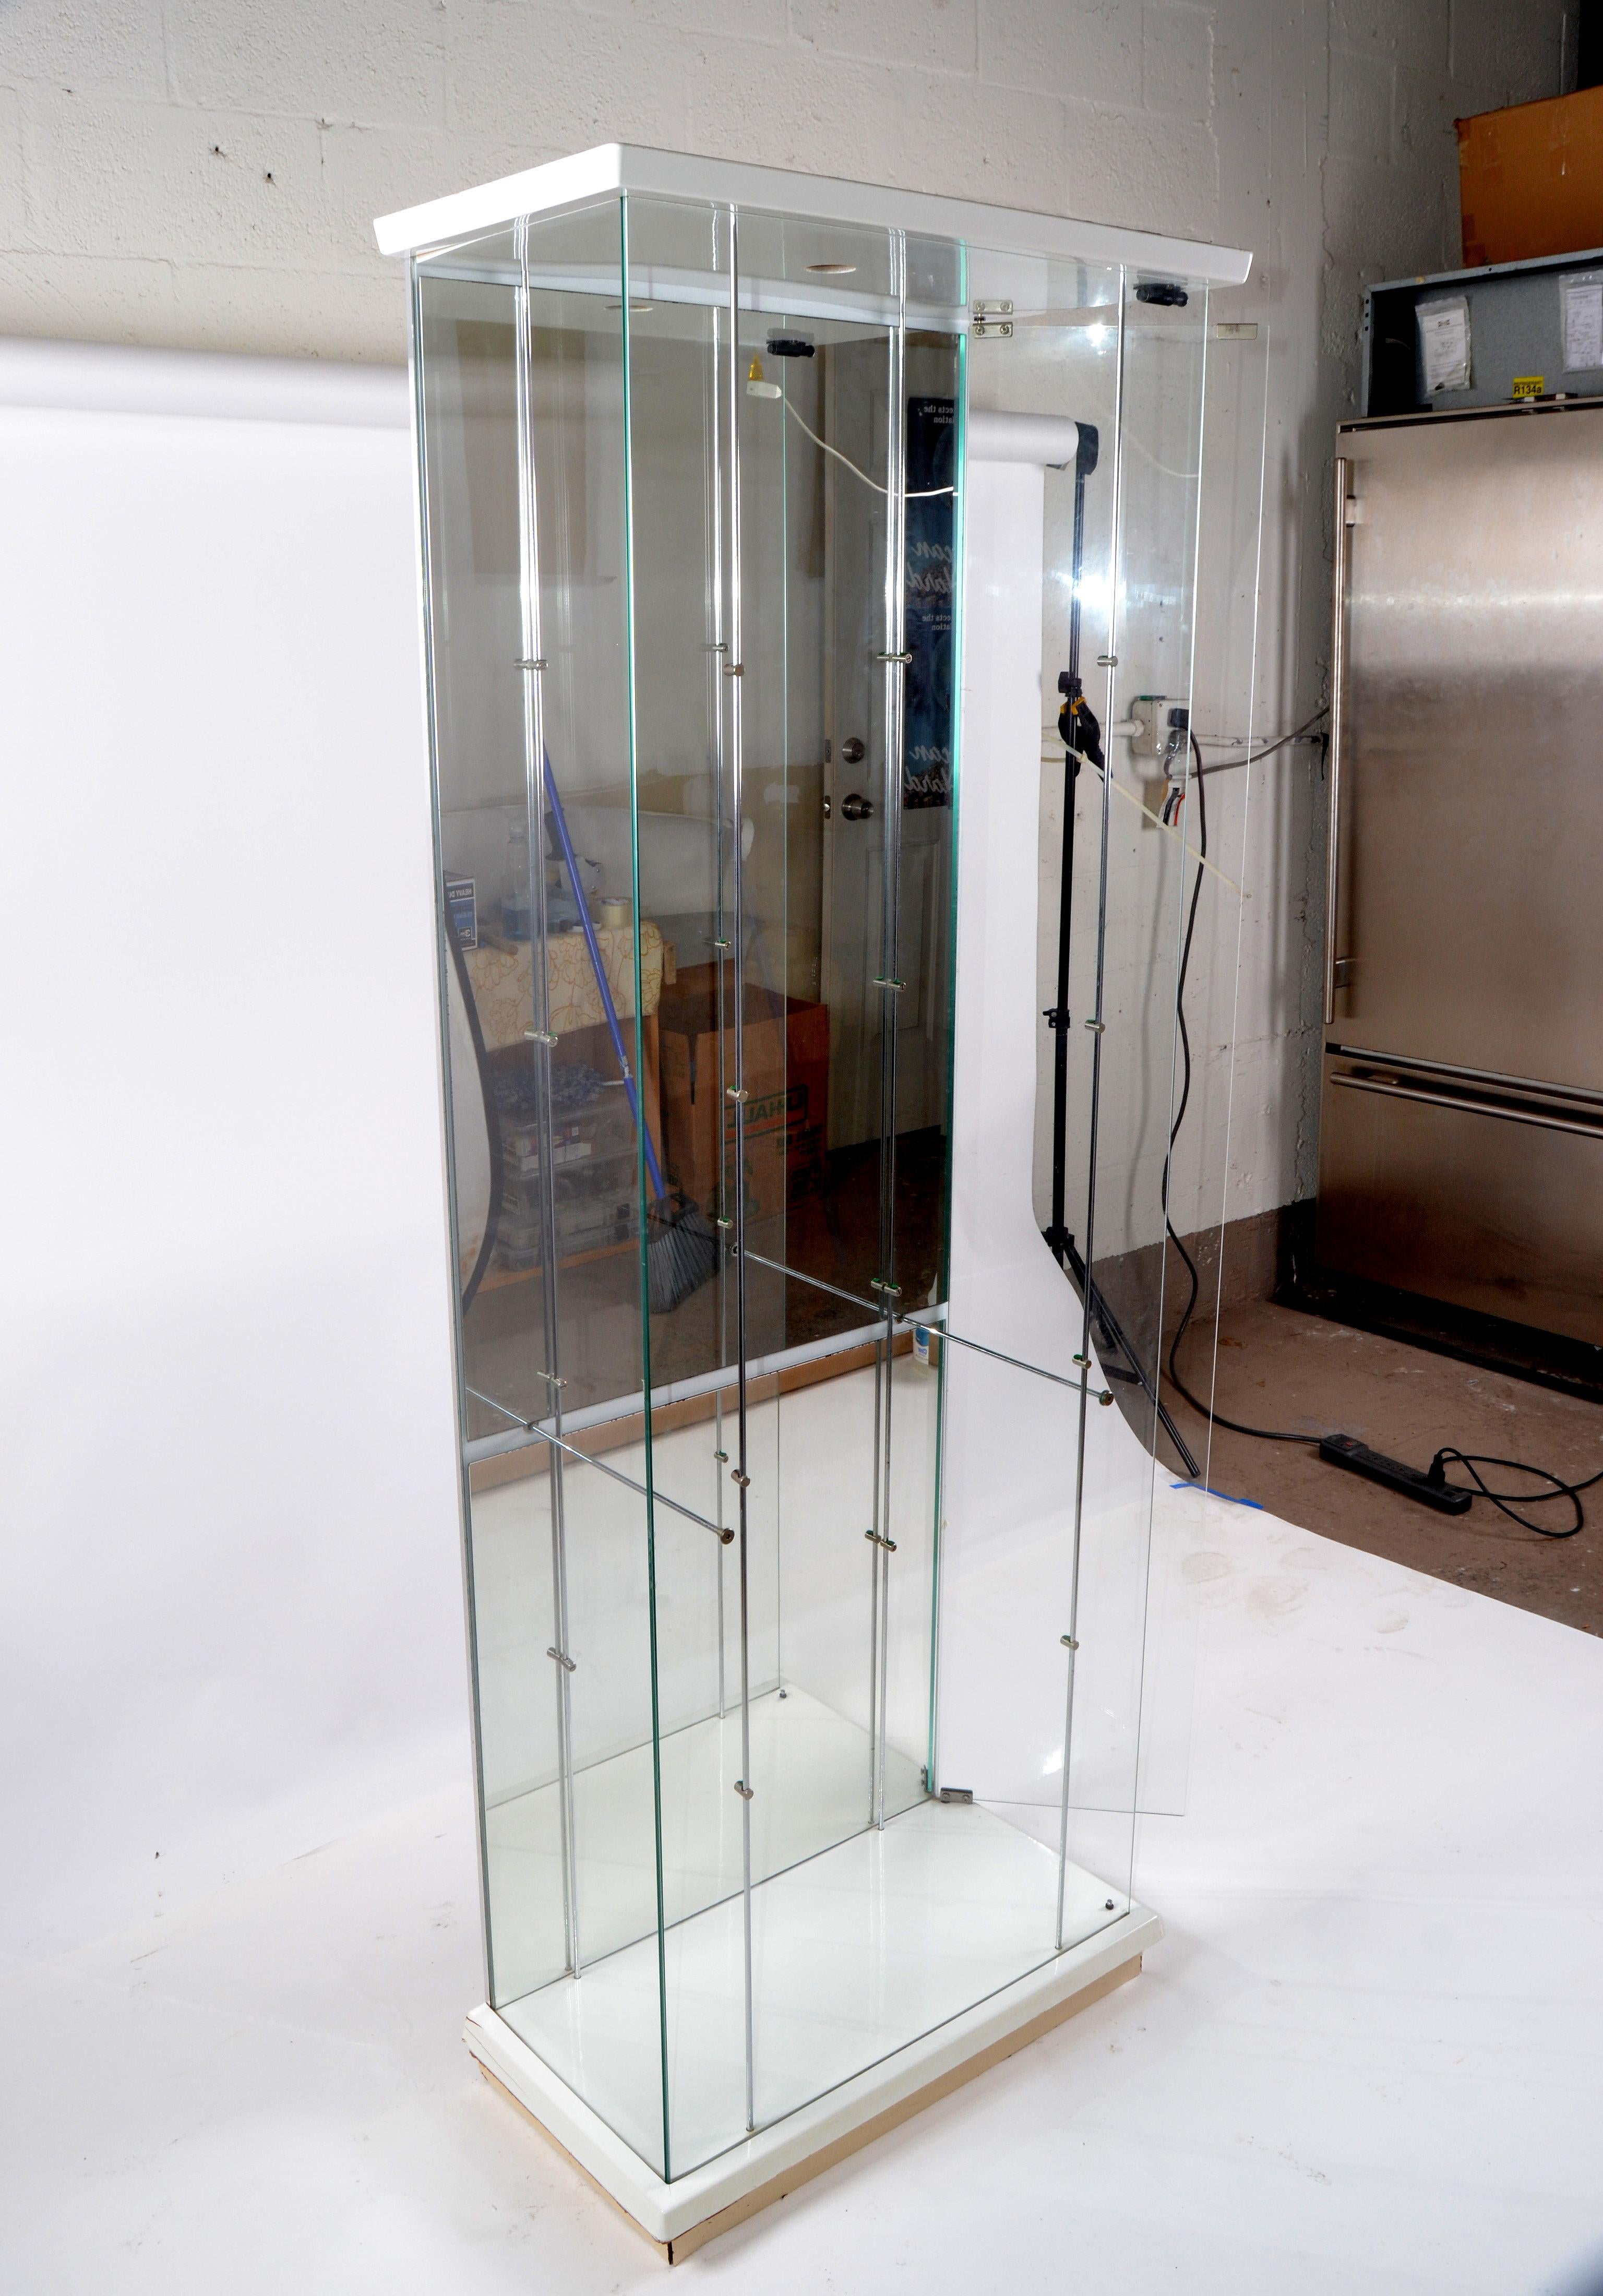 Six feet tall and four-level glass shelves Mid-Century Modern showcase made in Italy.
Wooden base and tall glass and chrome column display or storage case.
The door is at the side and works easy with a push on magnetic closure.
Labeled on the